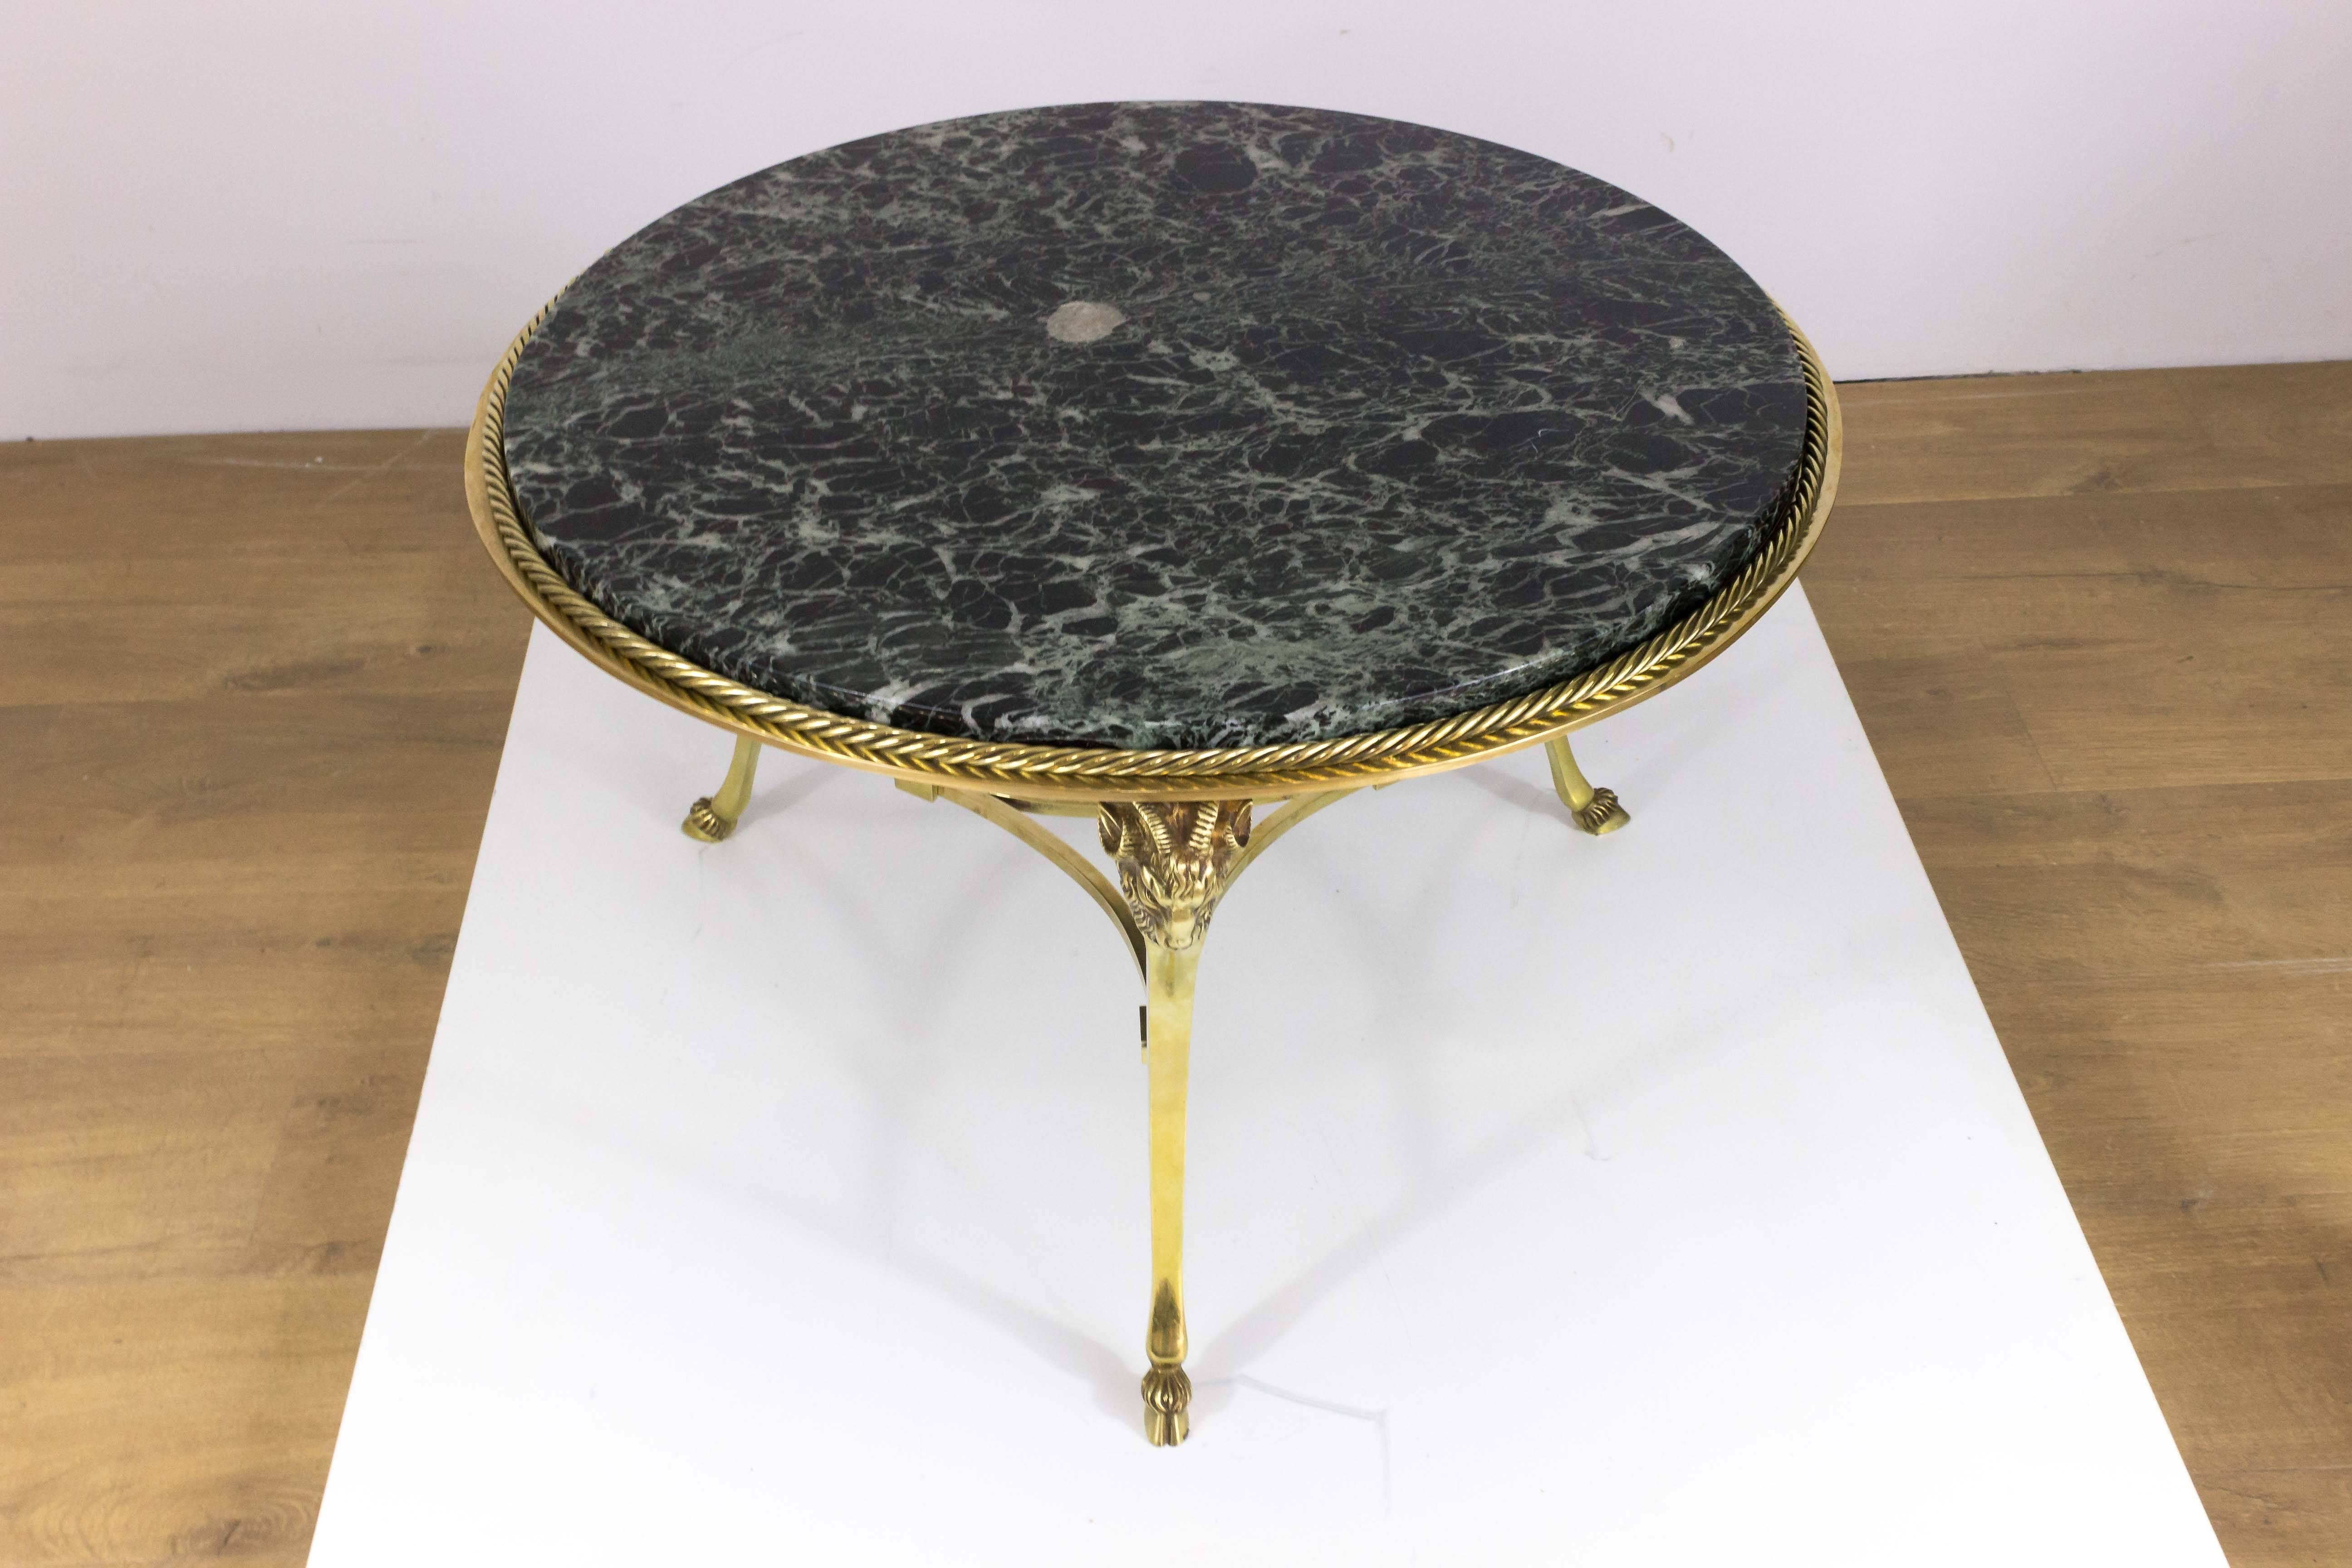 French 1950s brass and bronze coffee table with veined marble top resting on three legs. The top has a twisted roping detail and each leg has a ram's head on the top of the legs and hoofs at the base. 

This piece is still in France, please